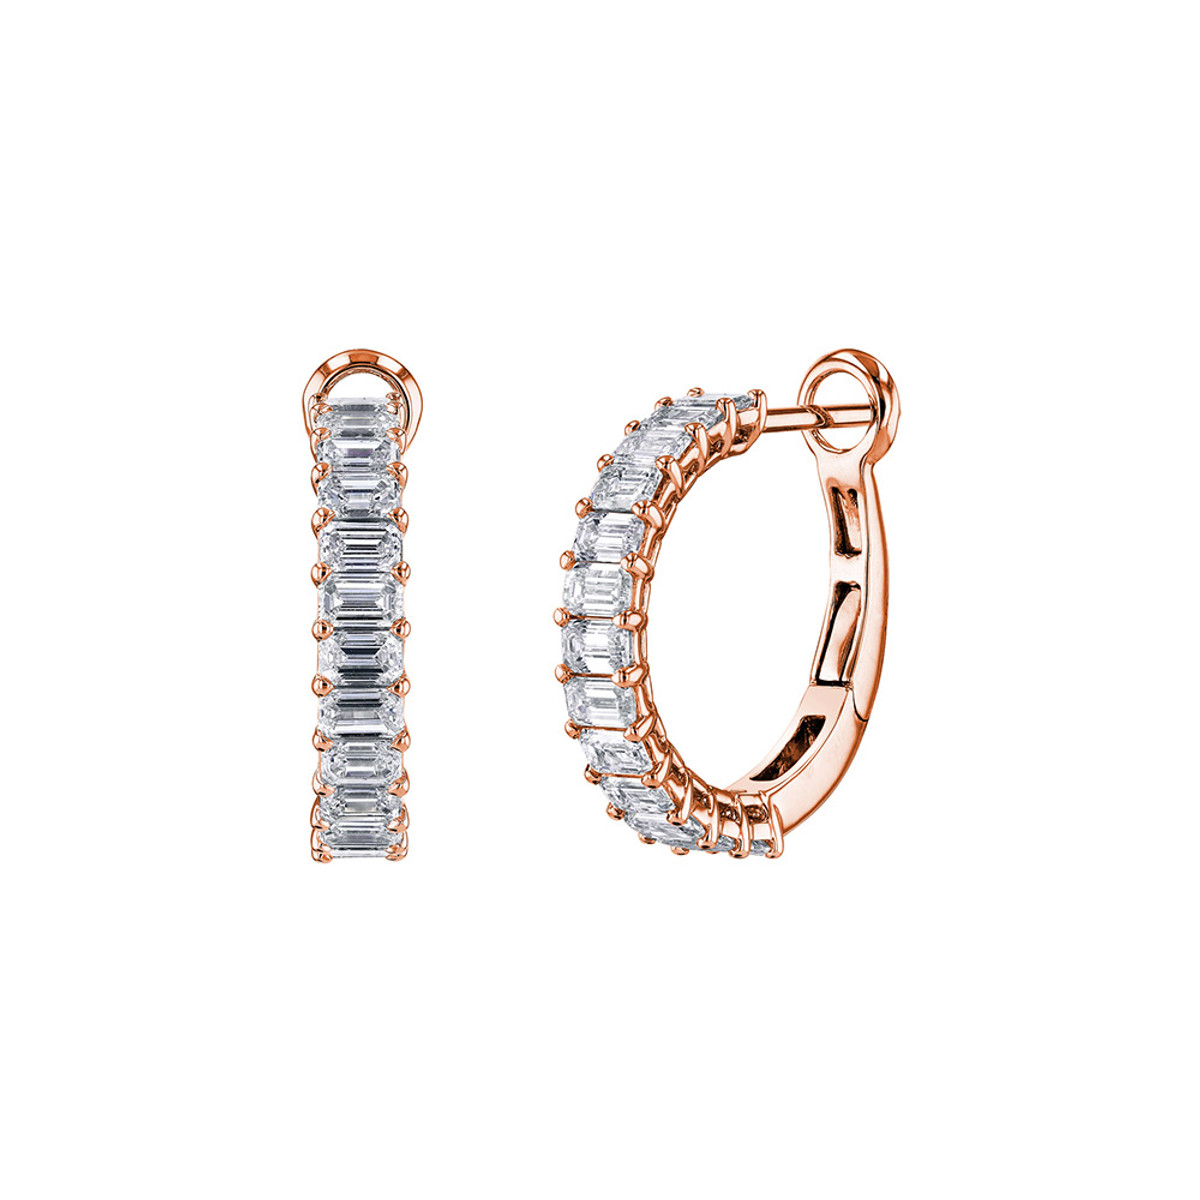 Hyde Park Collection 18K Rose Gold Diamond Hoop Earrings-59695 Product Image